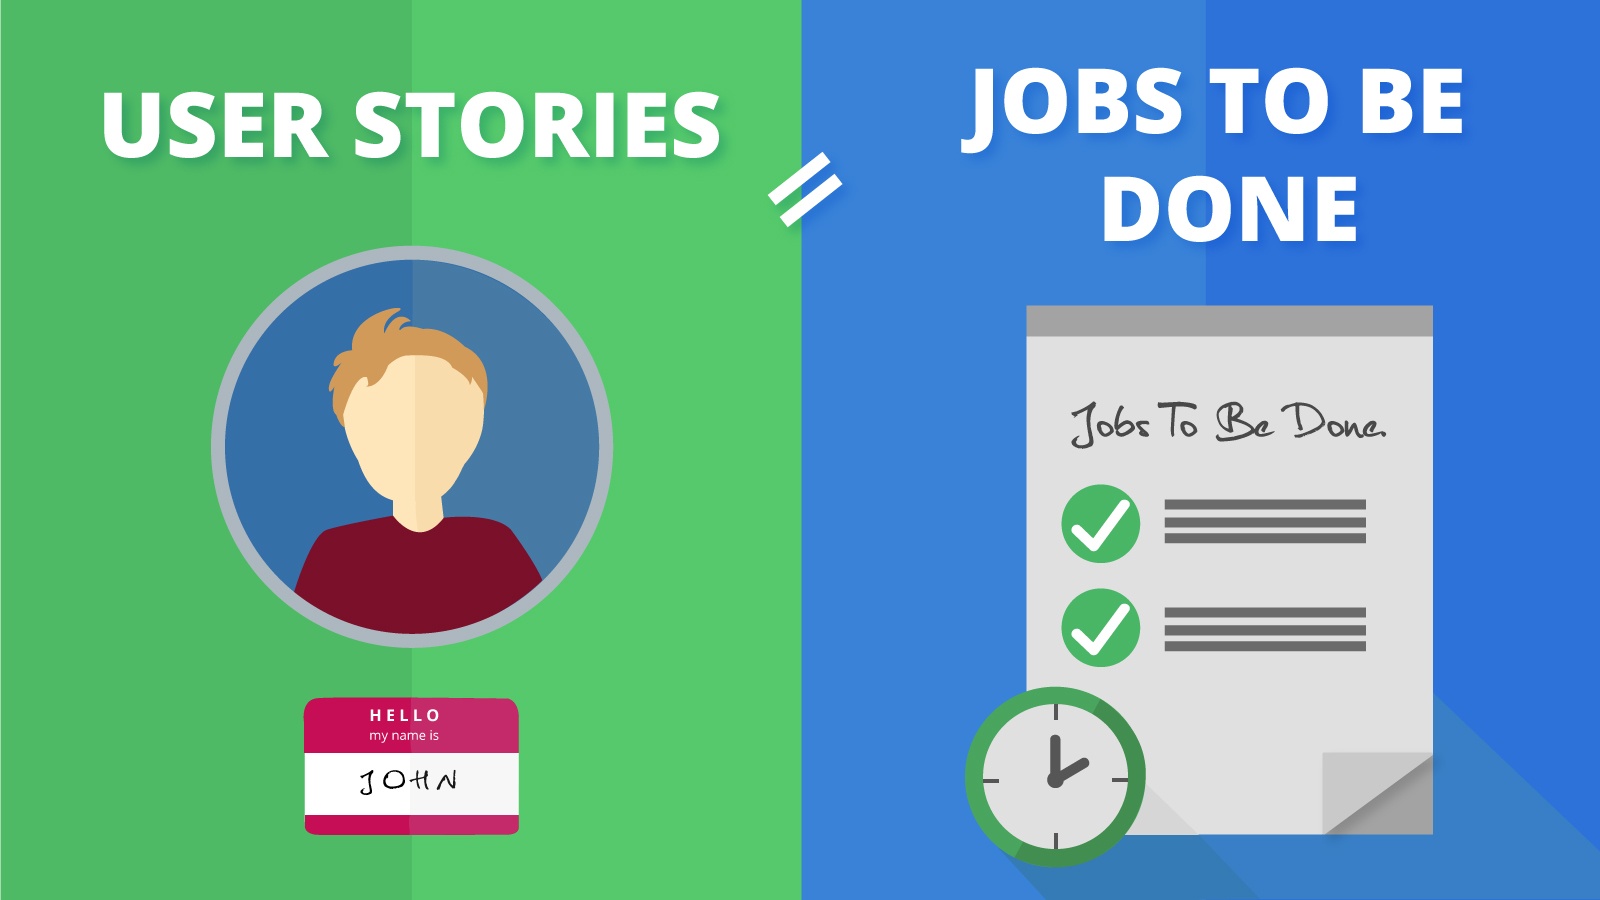 Jobs to Be Done Versus User Stories